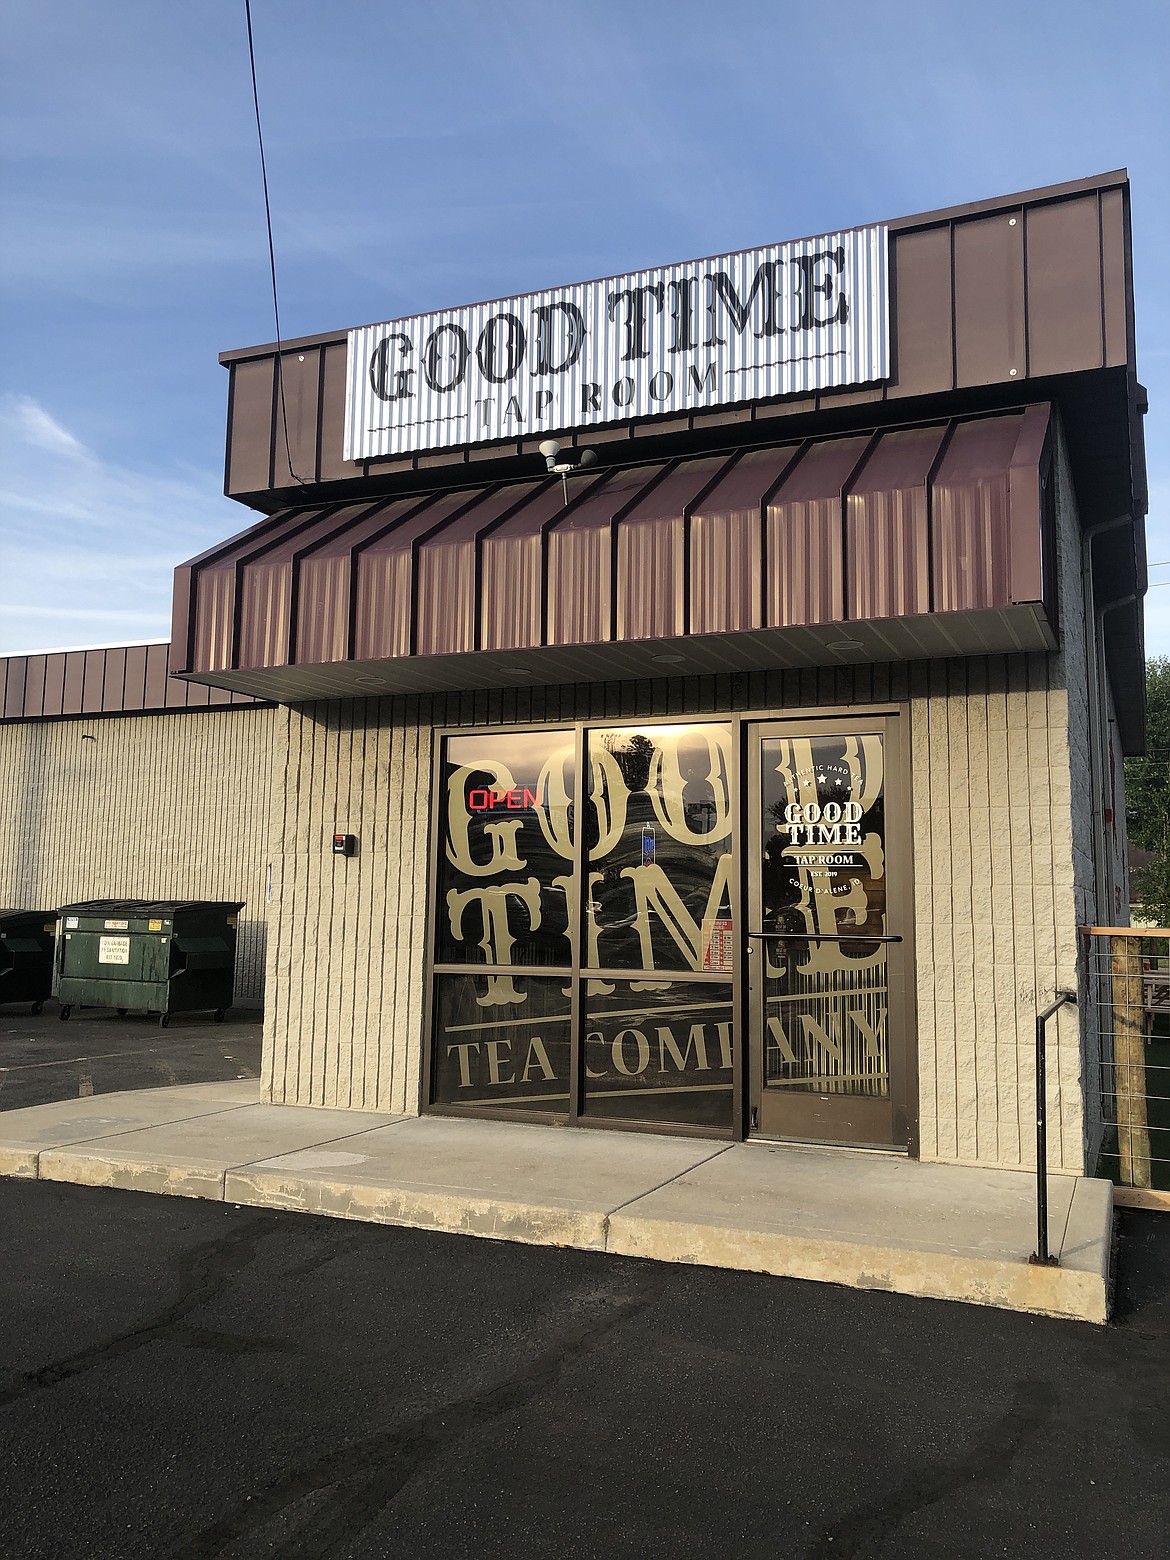 The Good Time Tap Room opened on 4th Street in CDA this June. In addition to standard drinks, the Good Time Brewery offers a unique, gluten-free alcoholic tea.